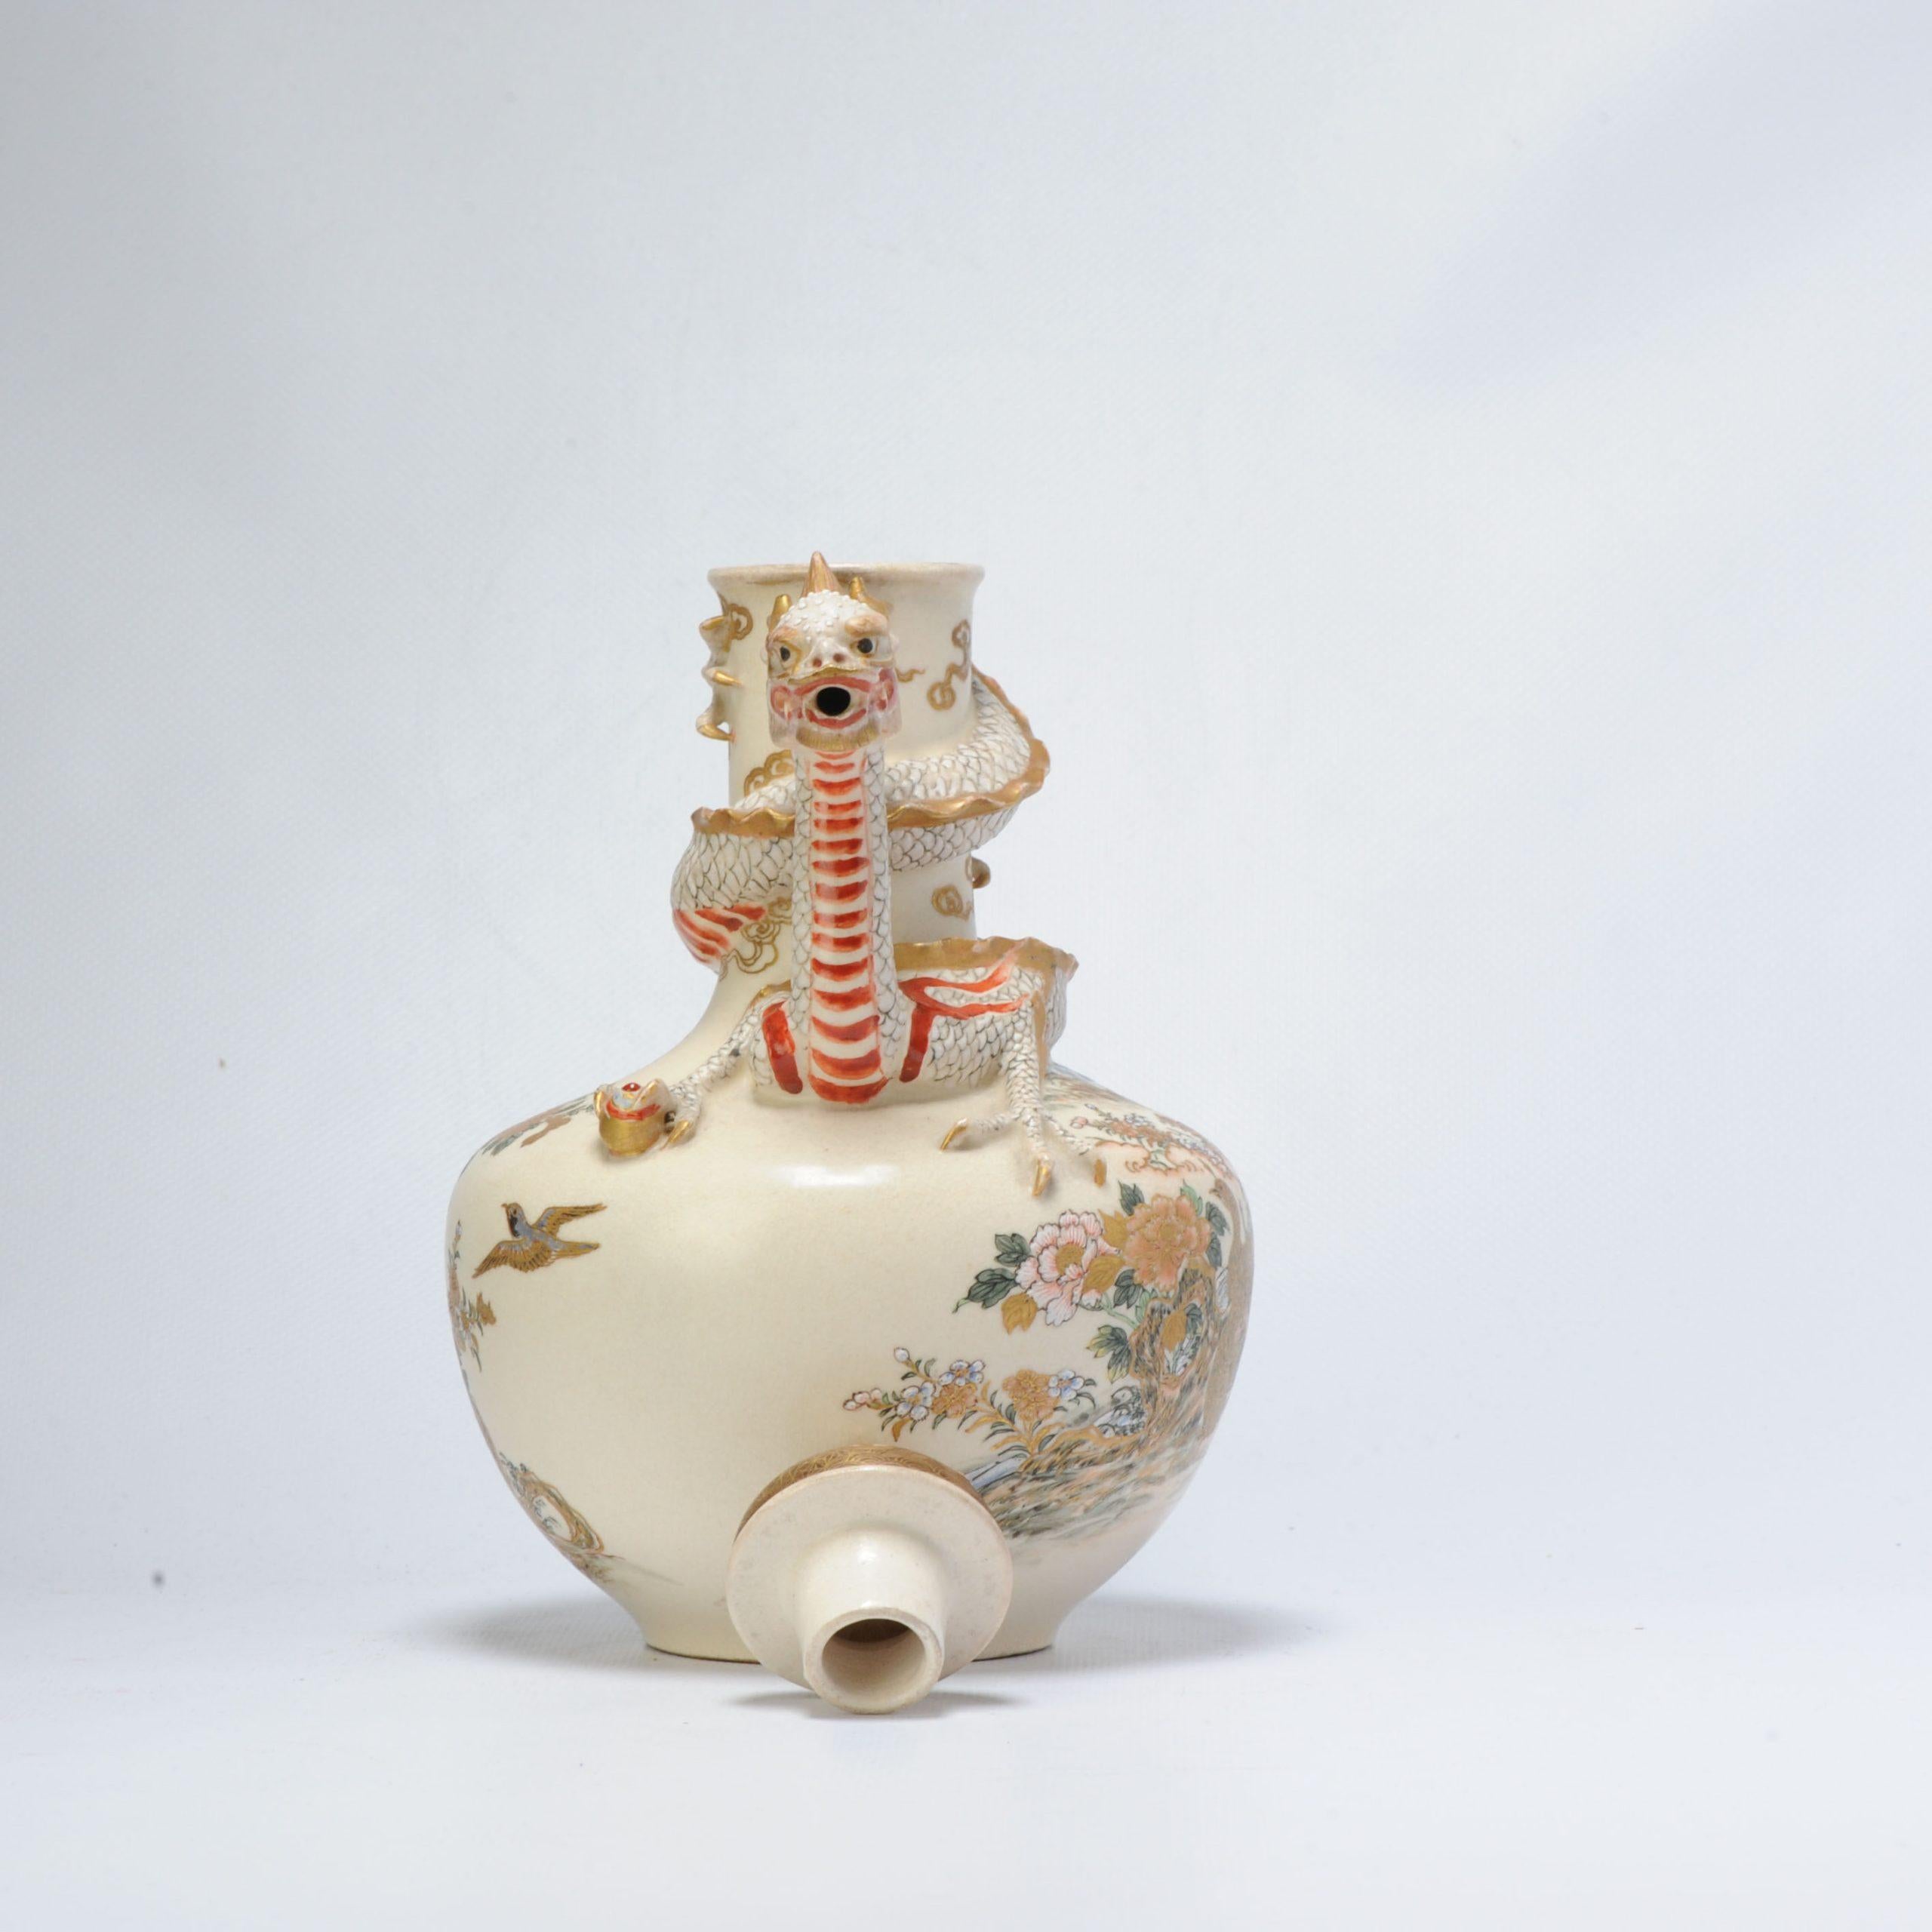 Interesting and finely painted satsuma Sake Pot / Teapot and vase with Gosu Blue. Very cool and of high quality.

Marked: The artist name reads (Seki-Sai)

Additional information:
Material: Porcelain & Pottery
Region of Origin: